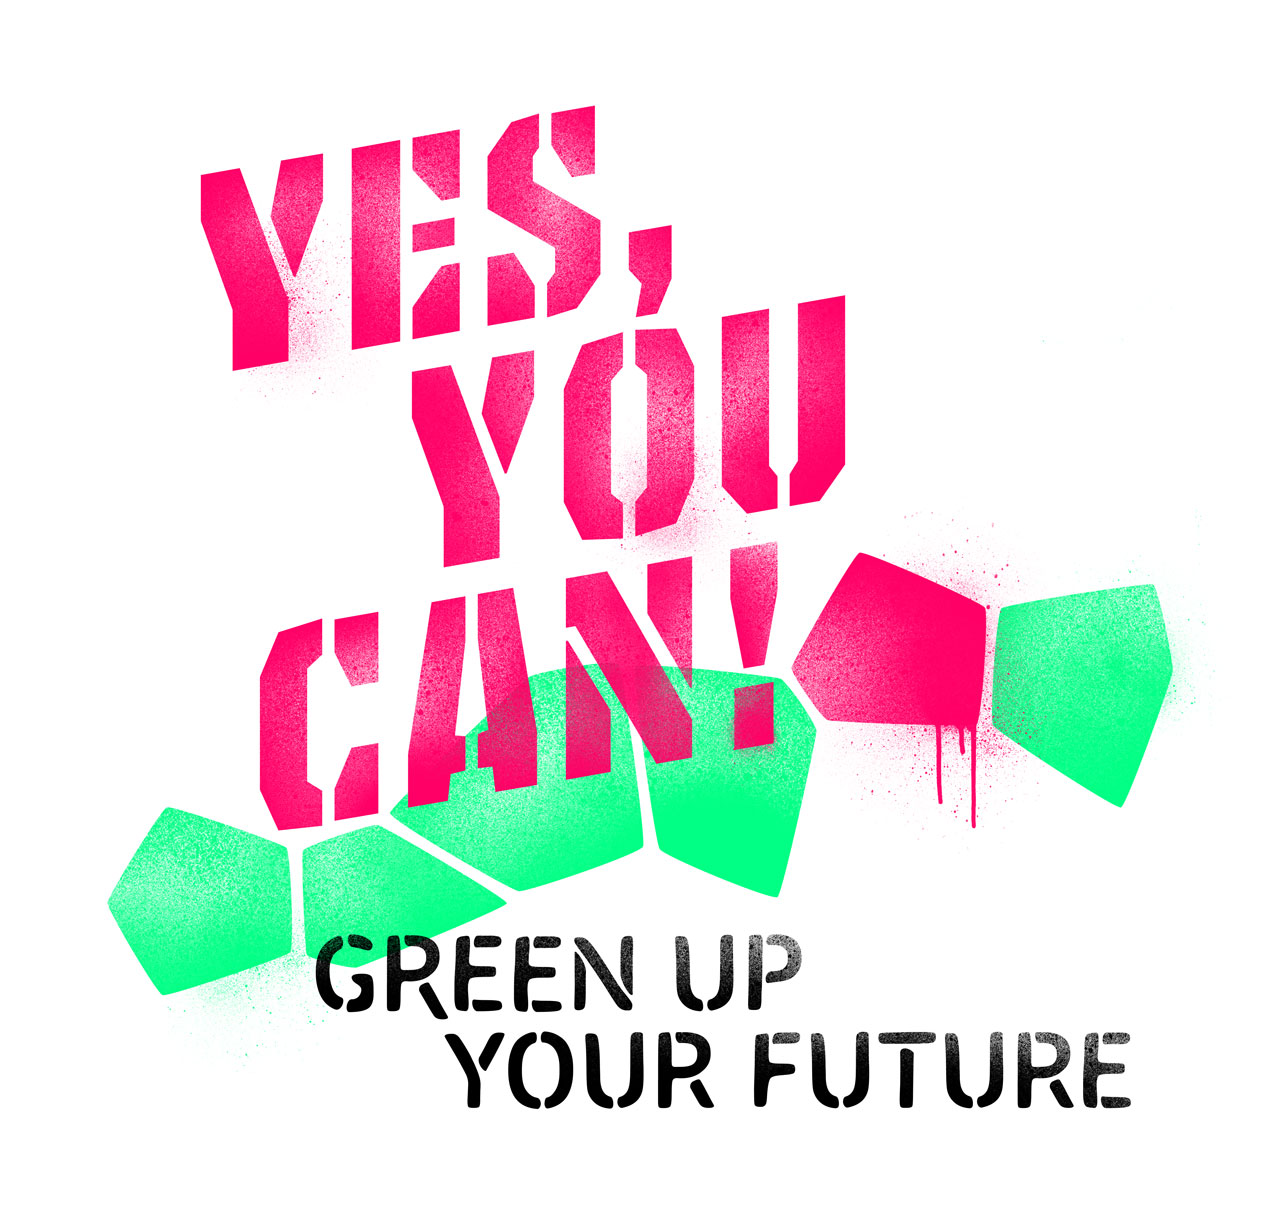 YES, YES YOU CAN! GREEN UP YOUR FUTURE